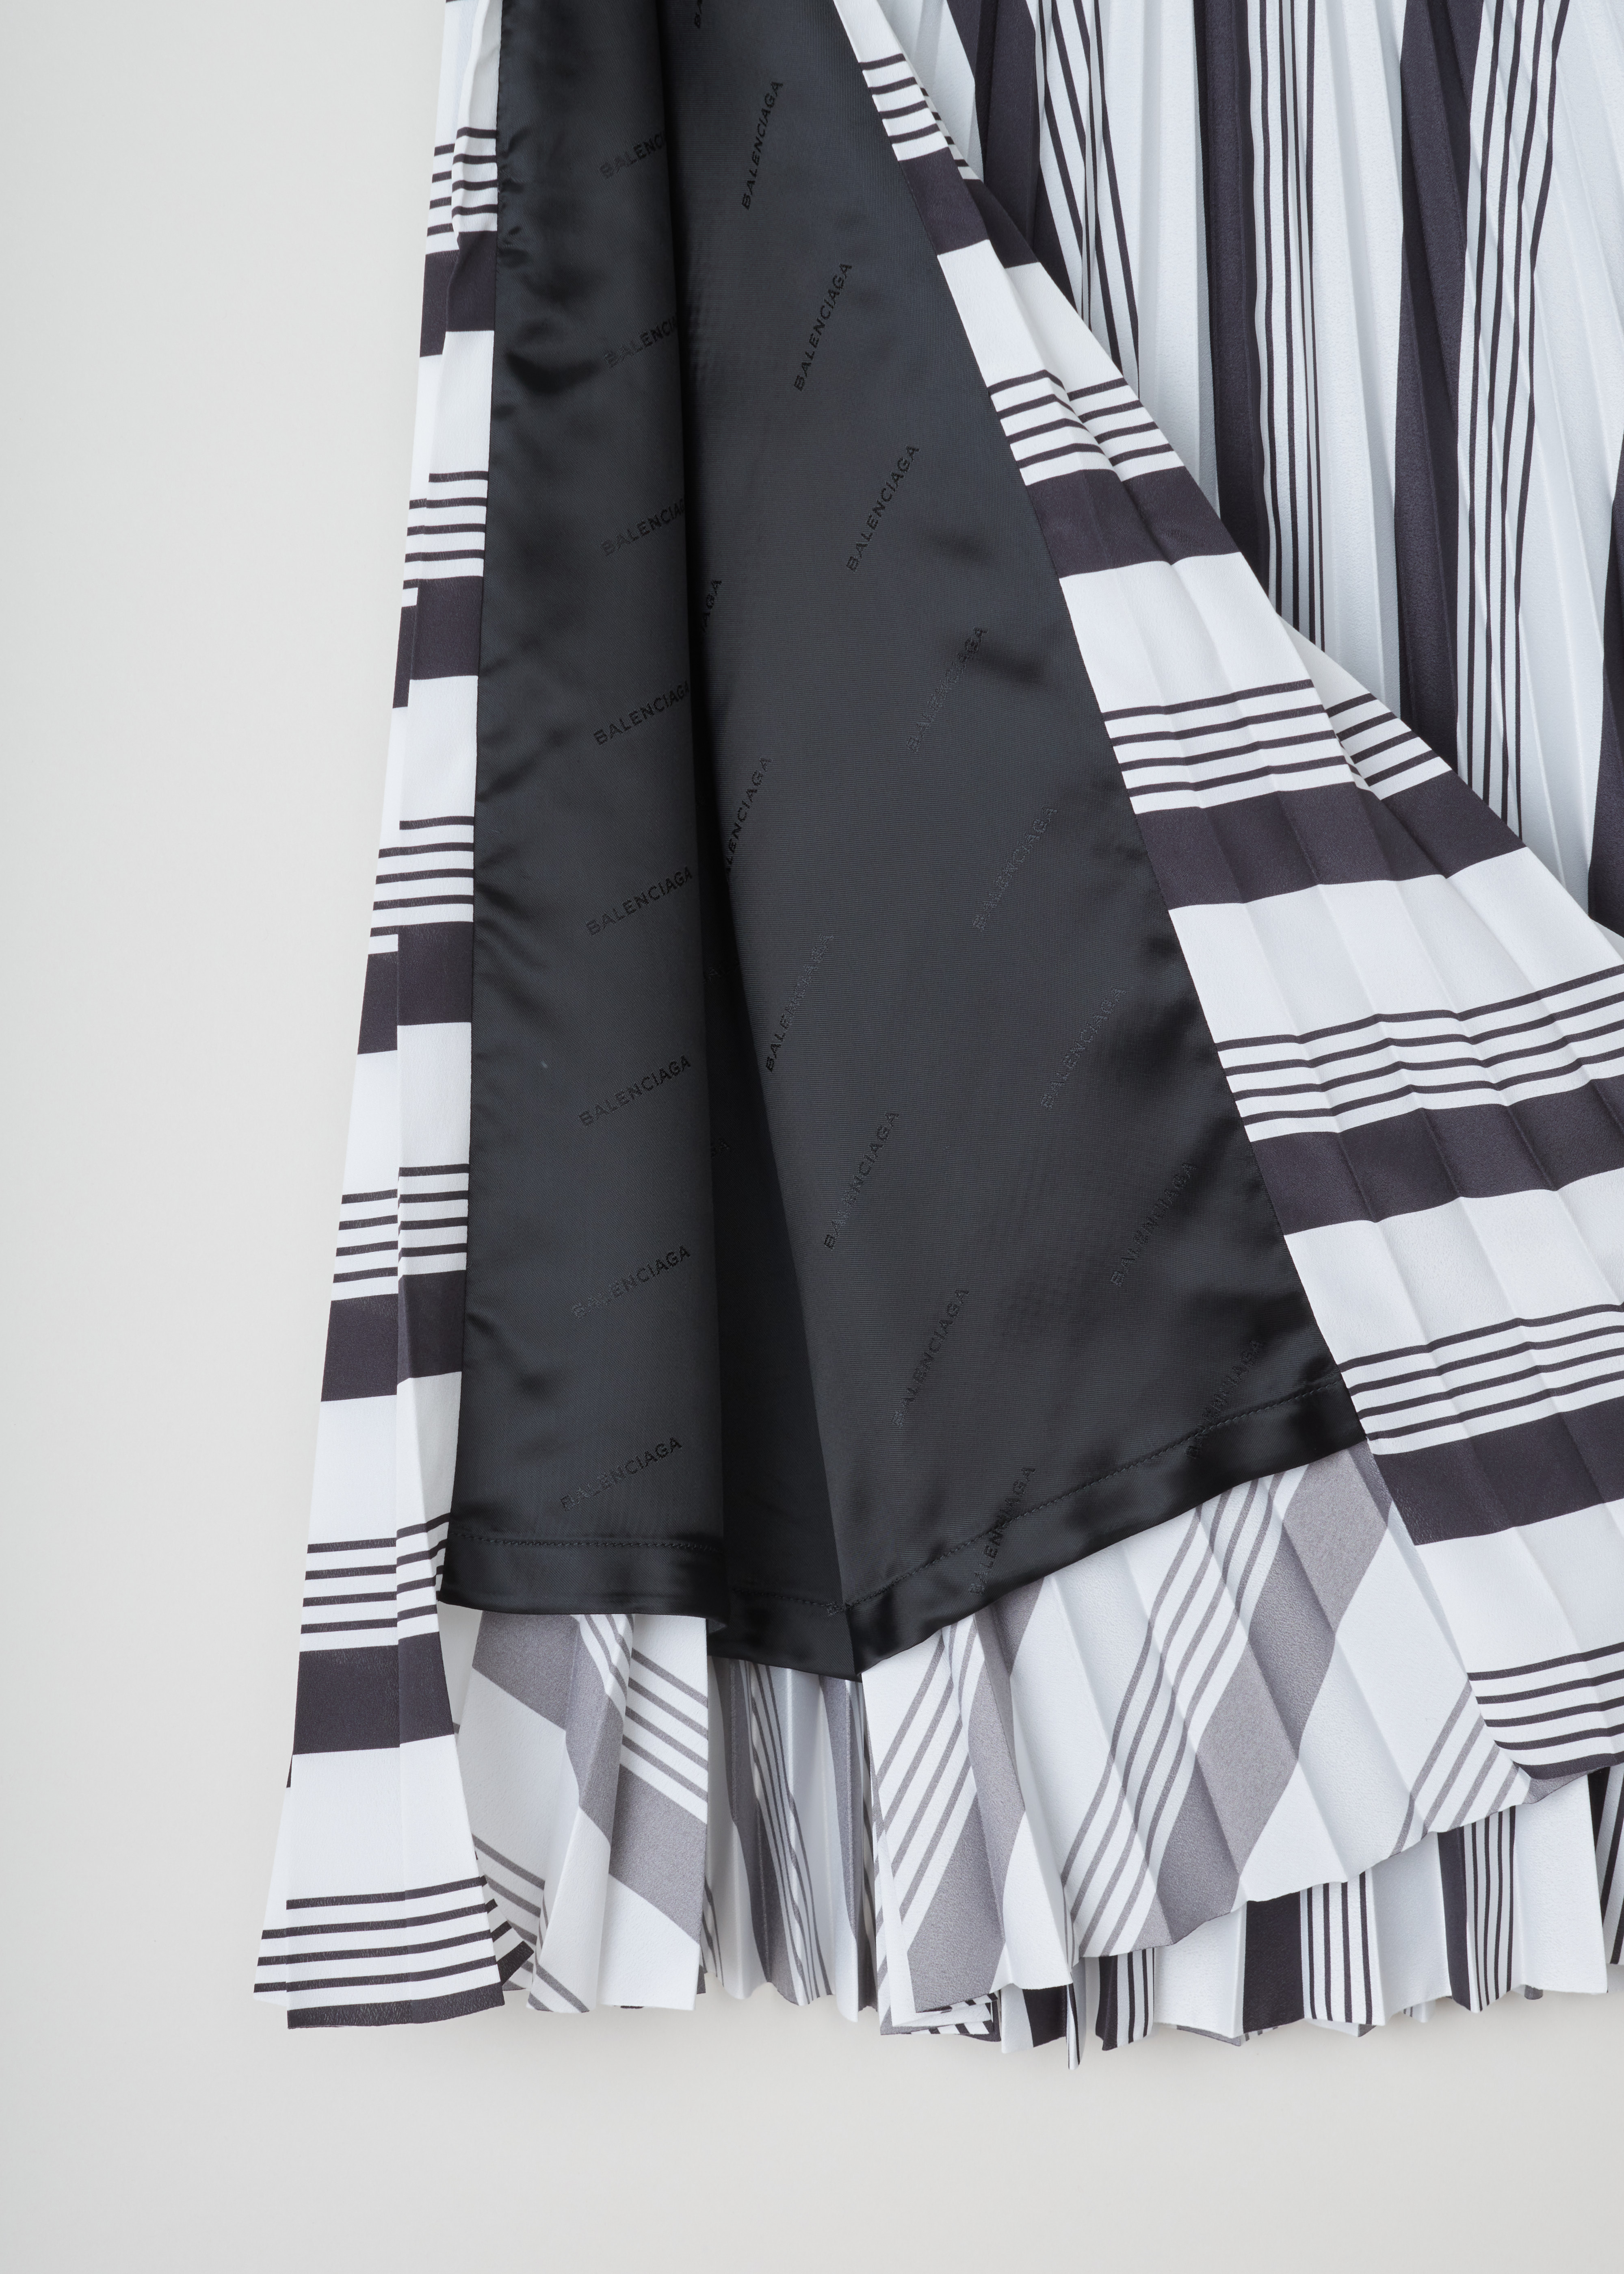 Balenciaga Striped pleated skirt 501971_TYA43_1070 noir blanc detail. White plissÃ© skirt with curved black stripe pattern, small waistband with four belt hoops, invisible zipper and slit on the side.